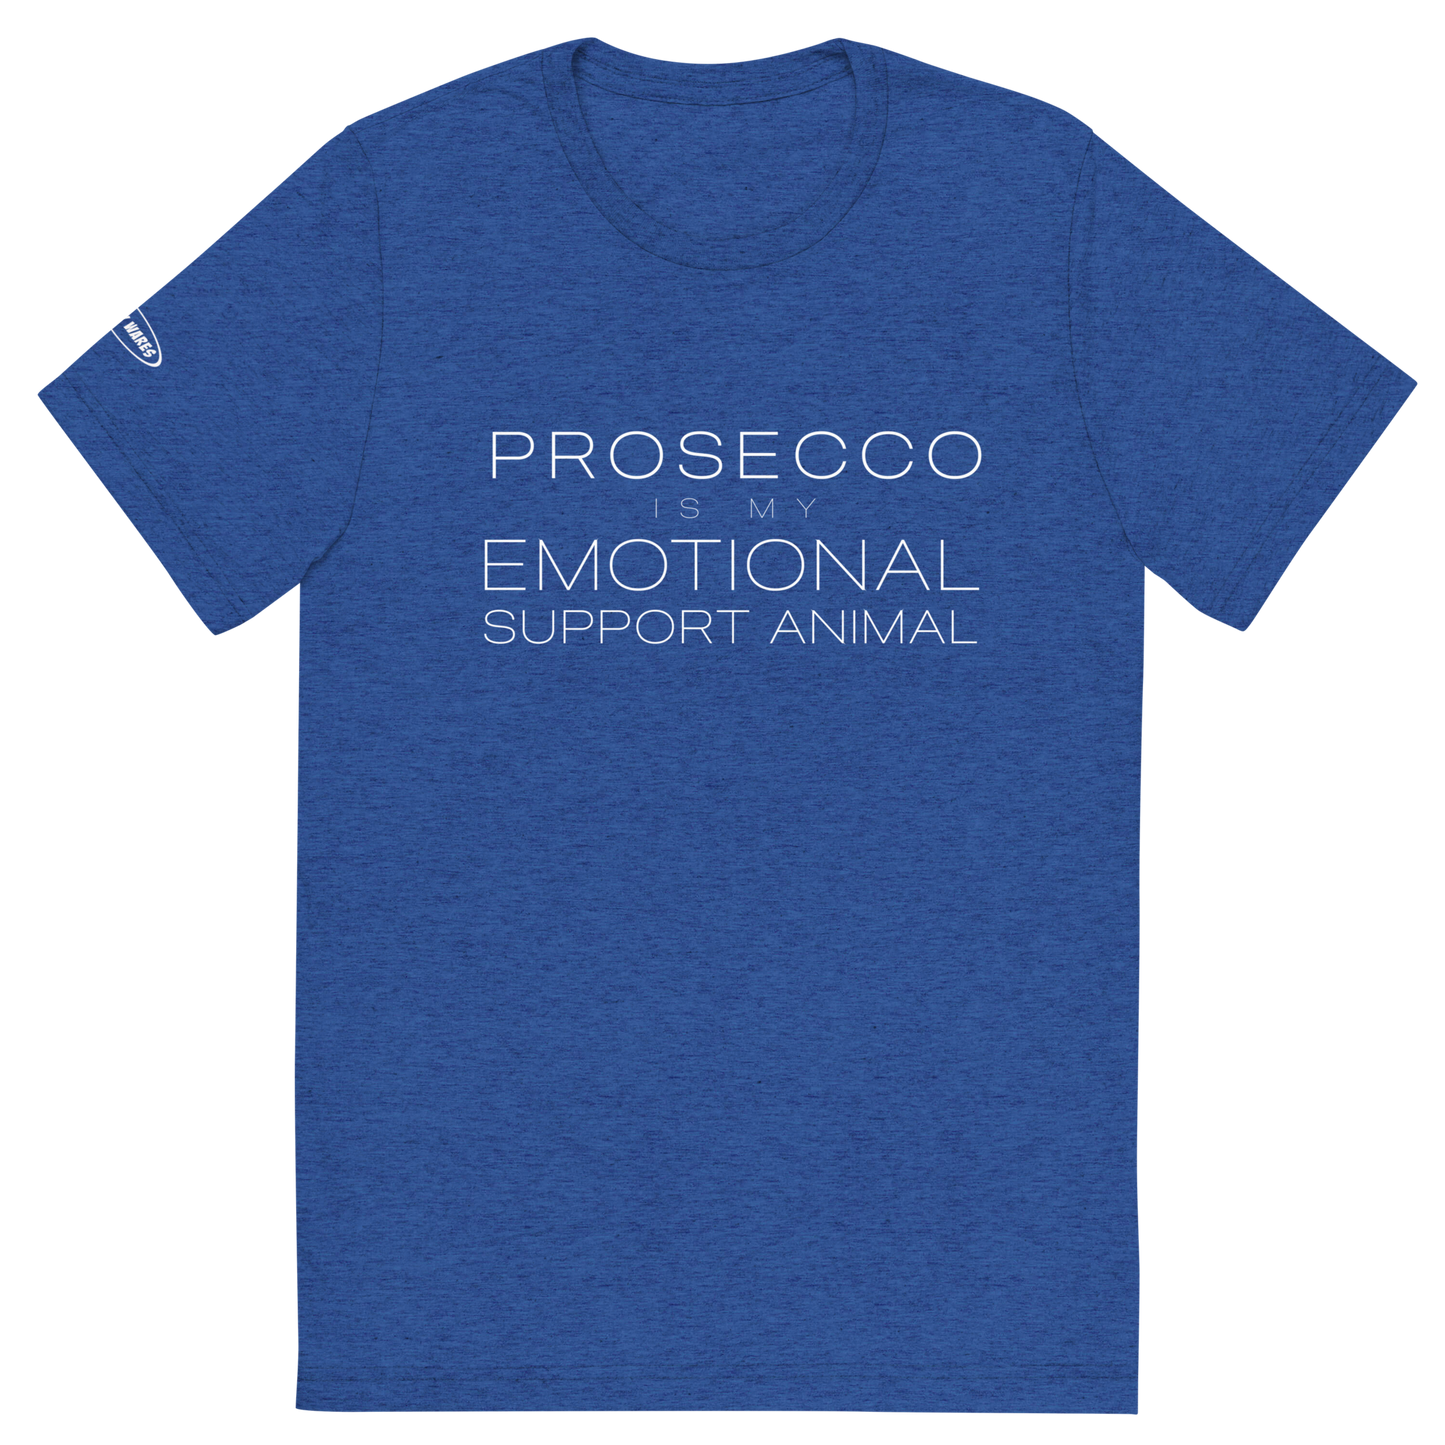 ALCOHOL - Prosecco is my Emotional Support Animal - Funny T-Shirt